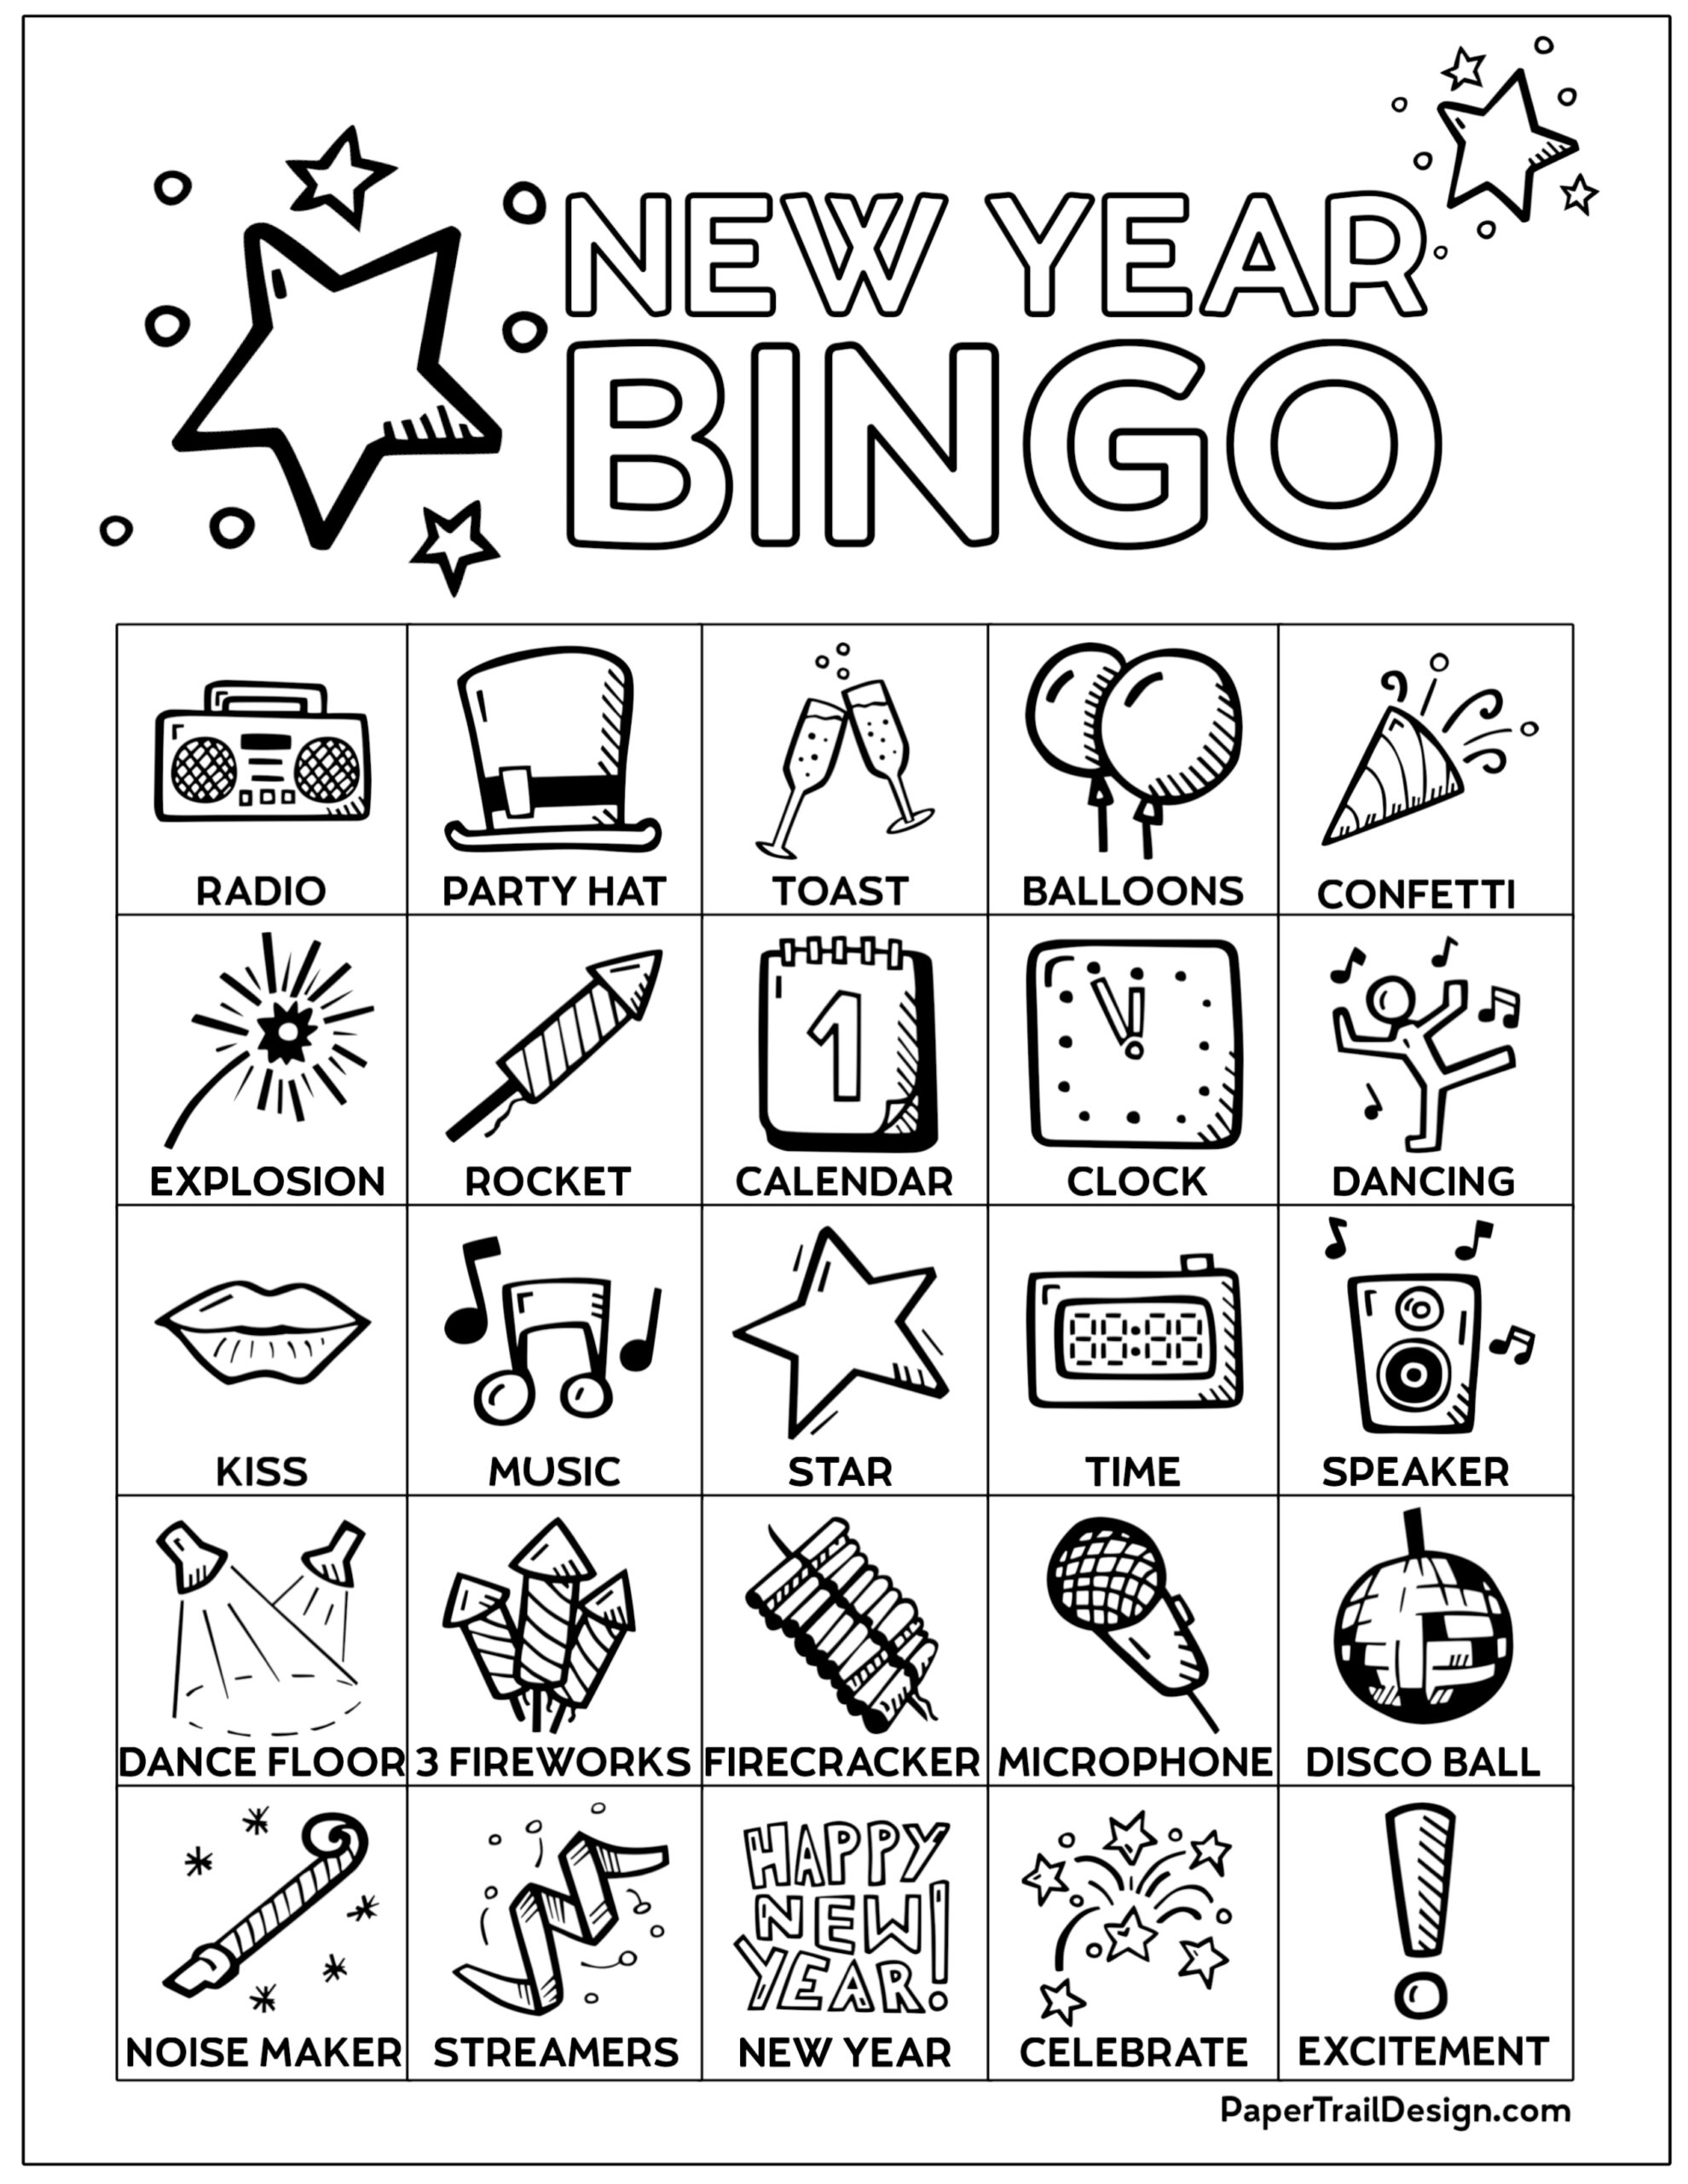 new-years-eve-bingo-free-printable-you-can-even-do-this-as-a-fun-game